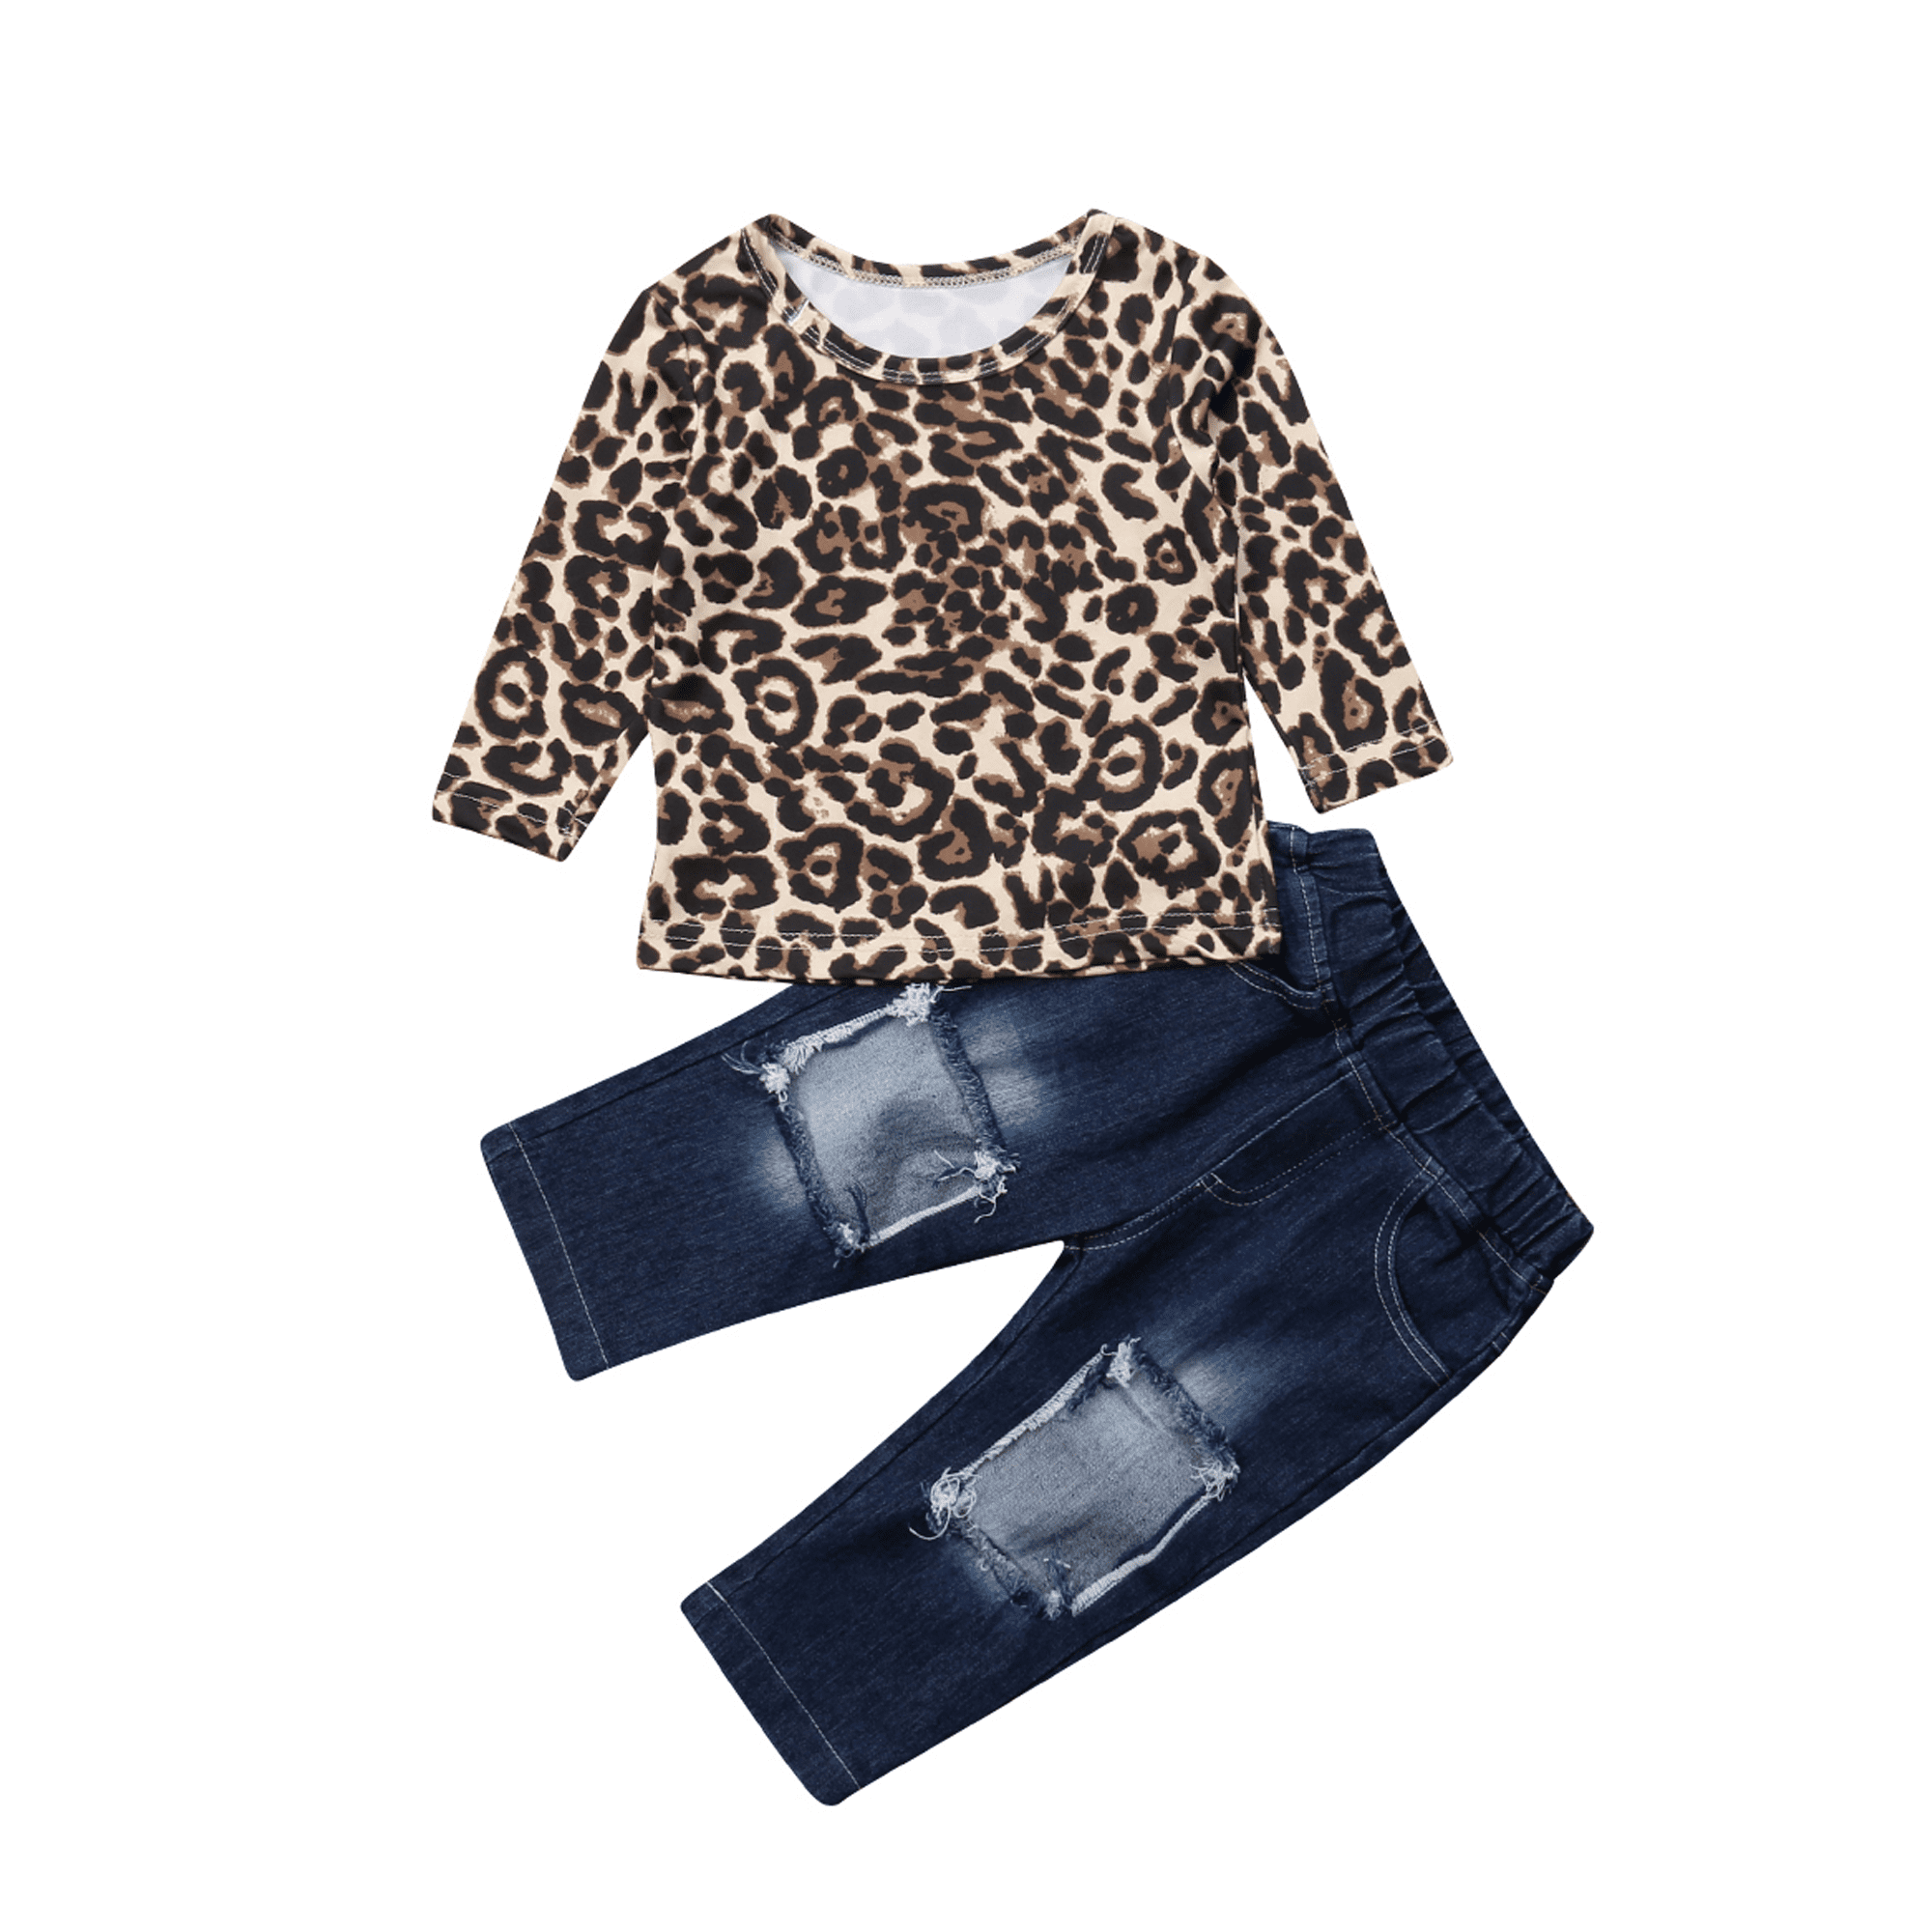 Kids Baby Girl Leopard Outfits Long Sleeve Tops+Ripped Denim Jeans Pants Clothes